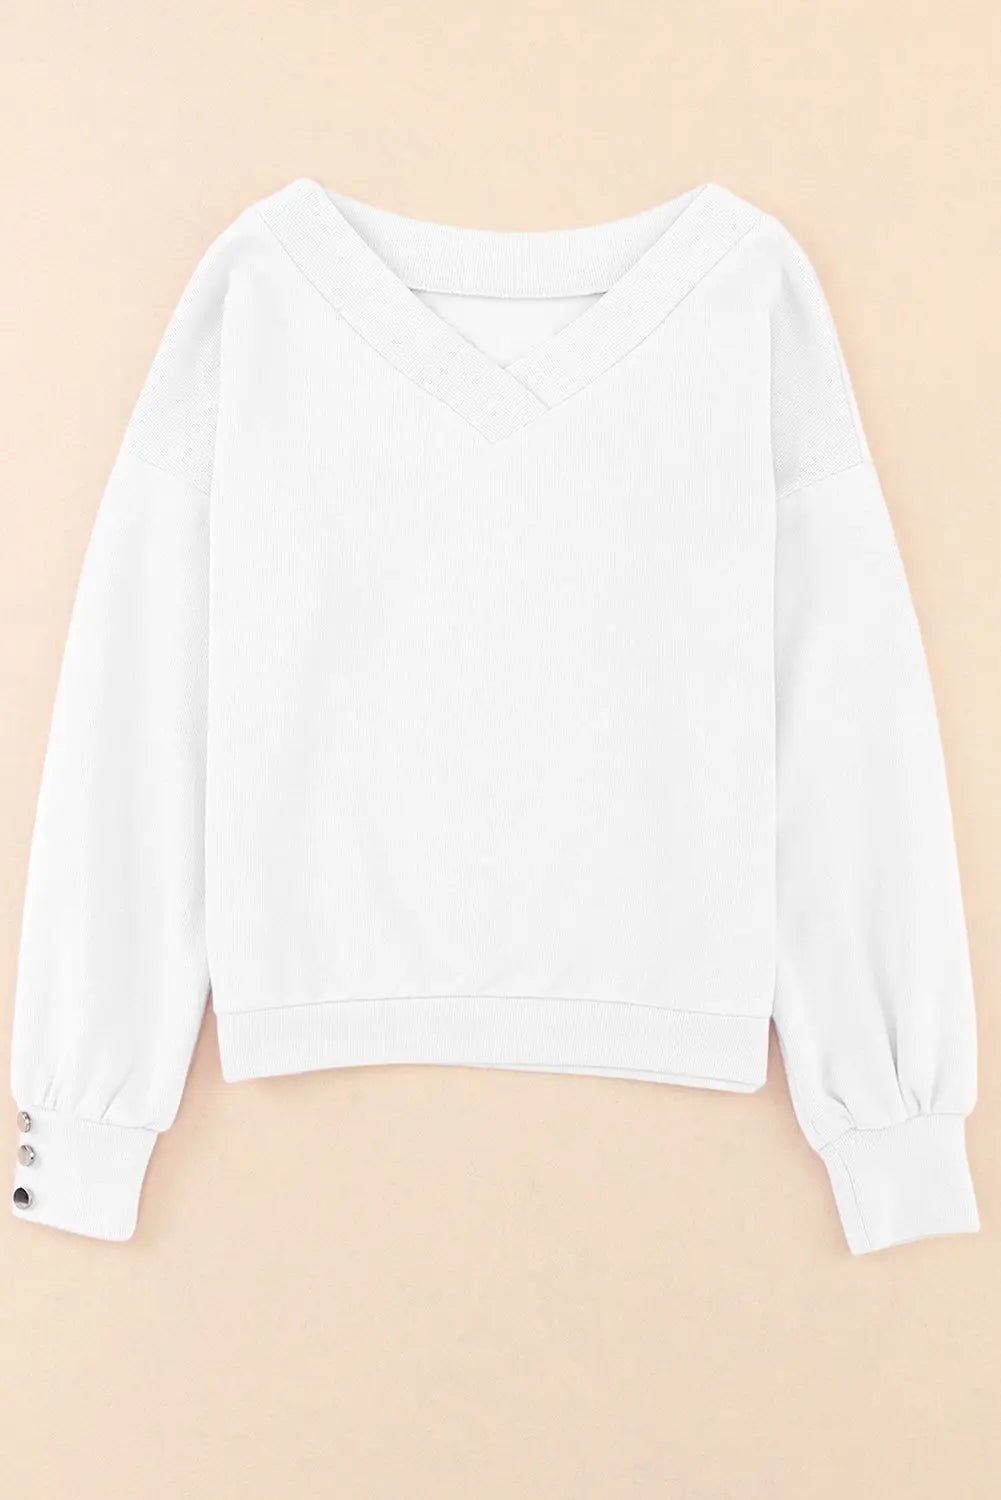 White knitted v neck buttoned cuffs sweater - tops